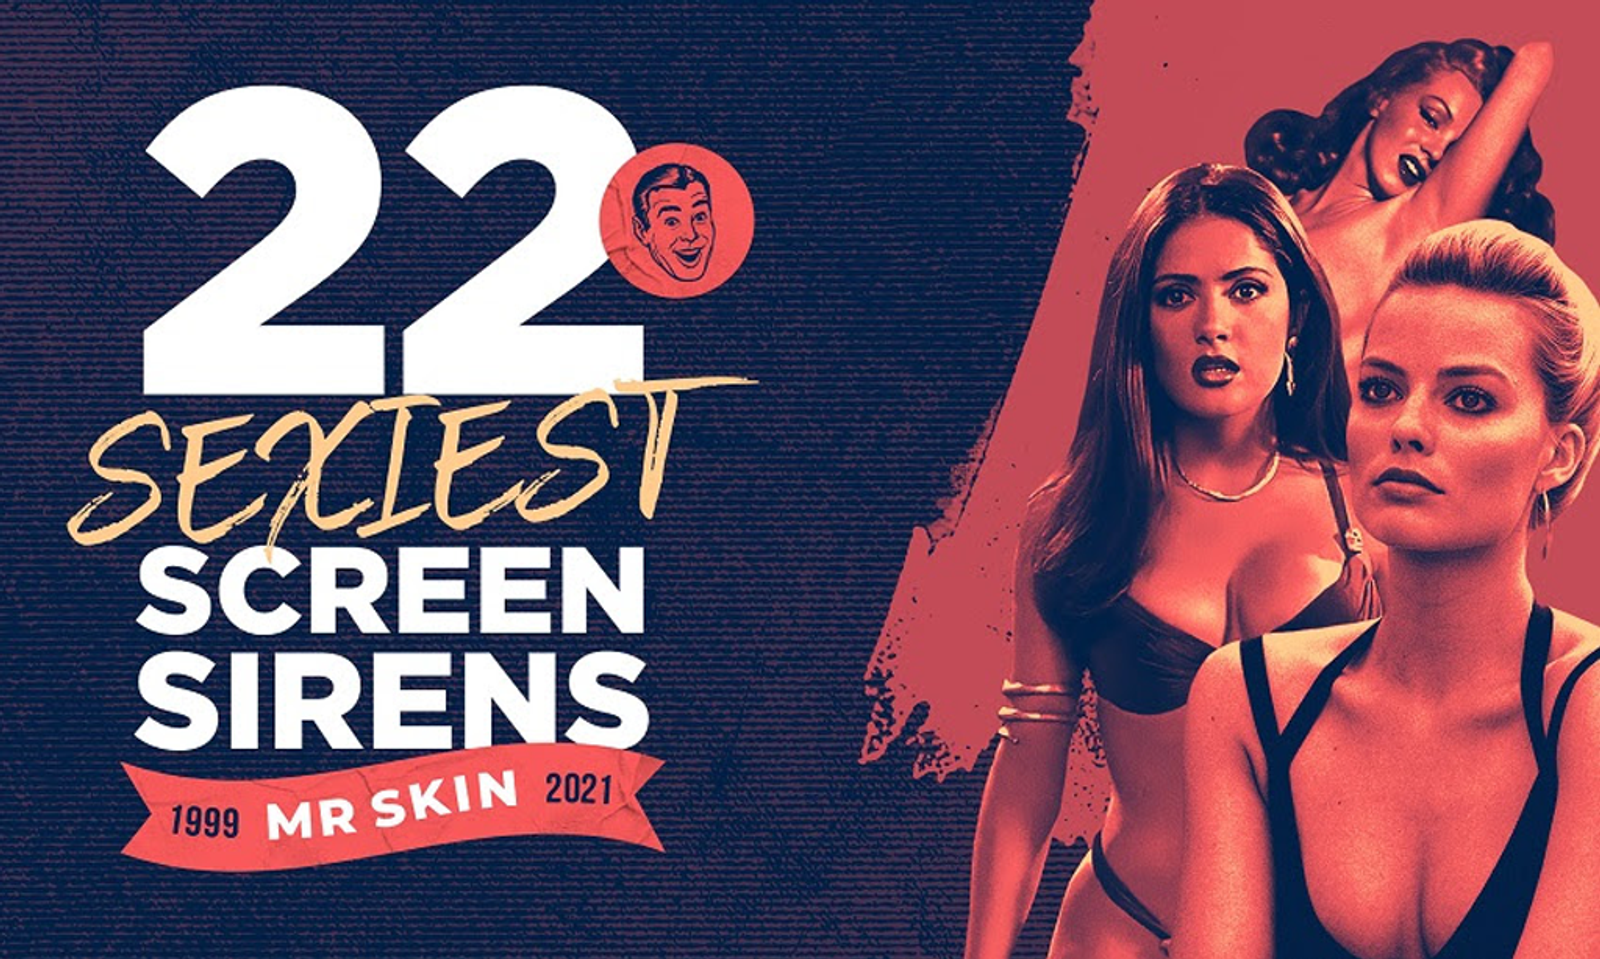 Mr. Skin Names '22 Sexiest Screen Sirens' for 22nd Anniversary